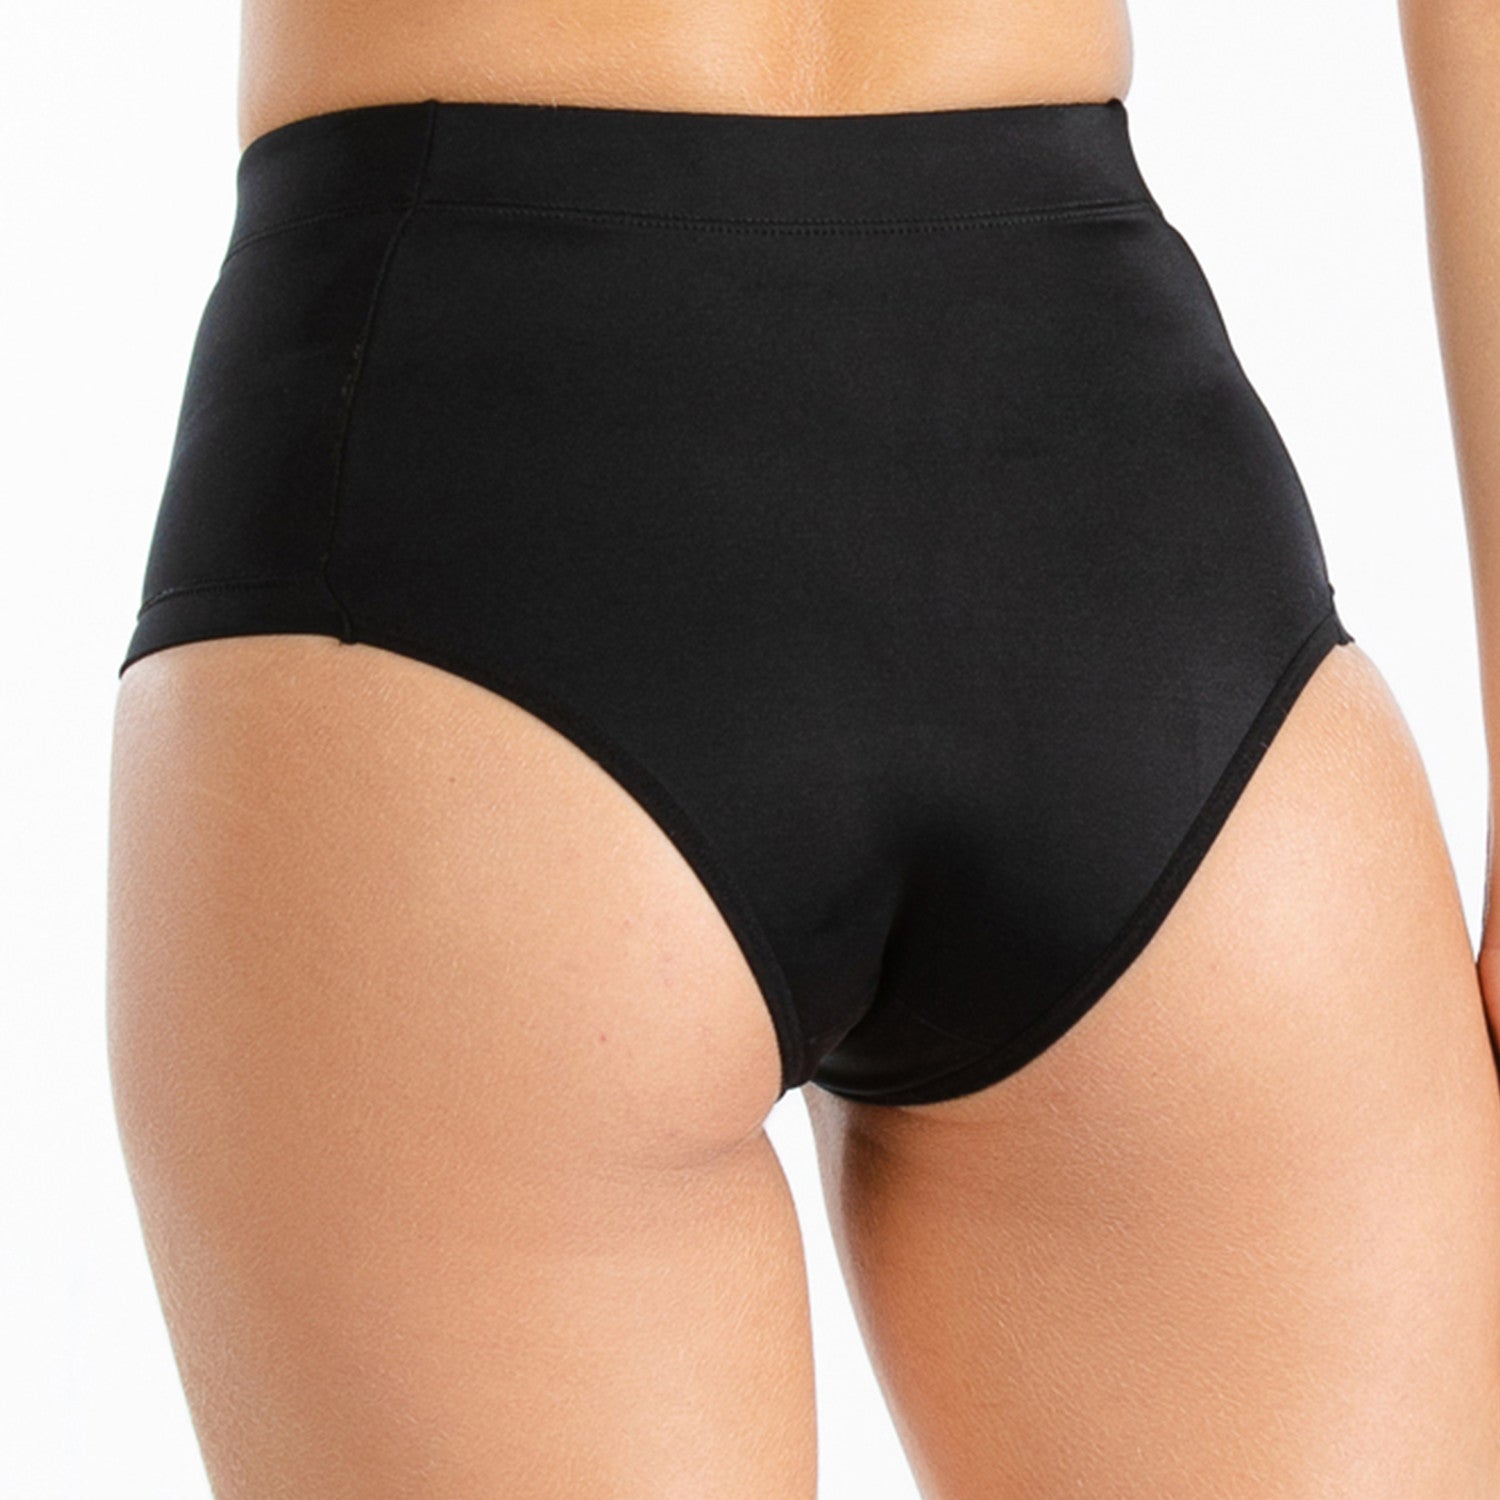 Compression Shaping Panty - XL/2X - Black, Online Store